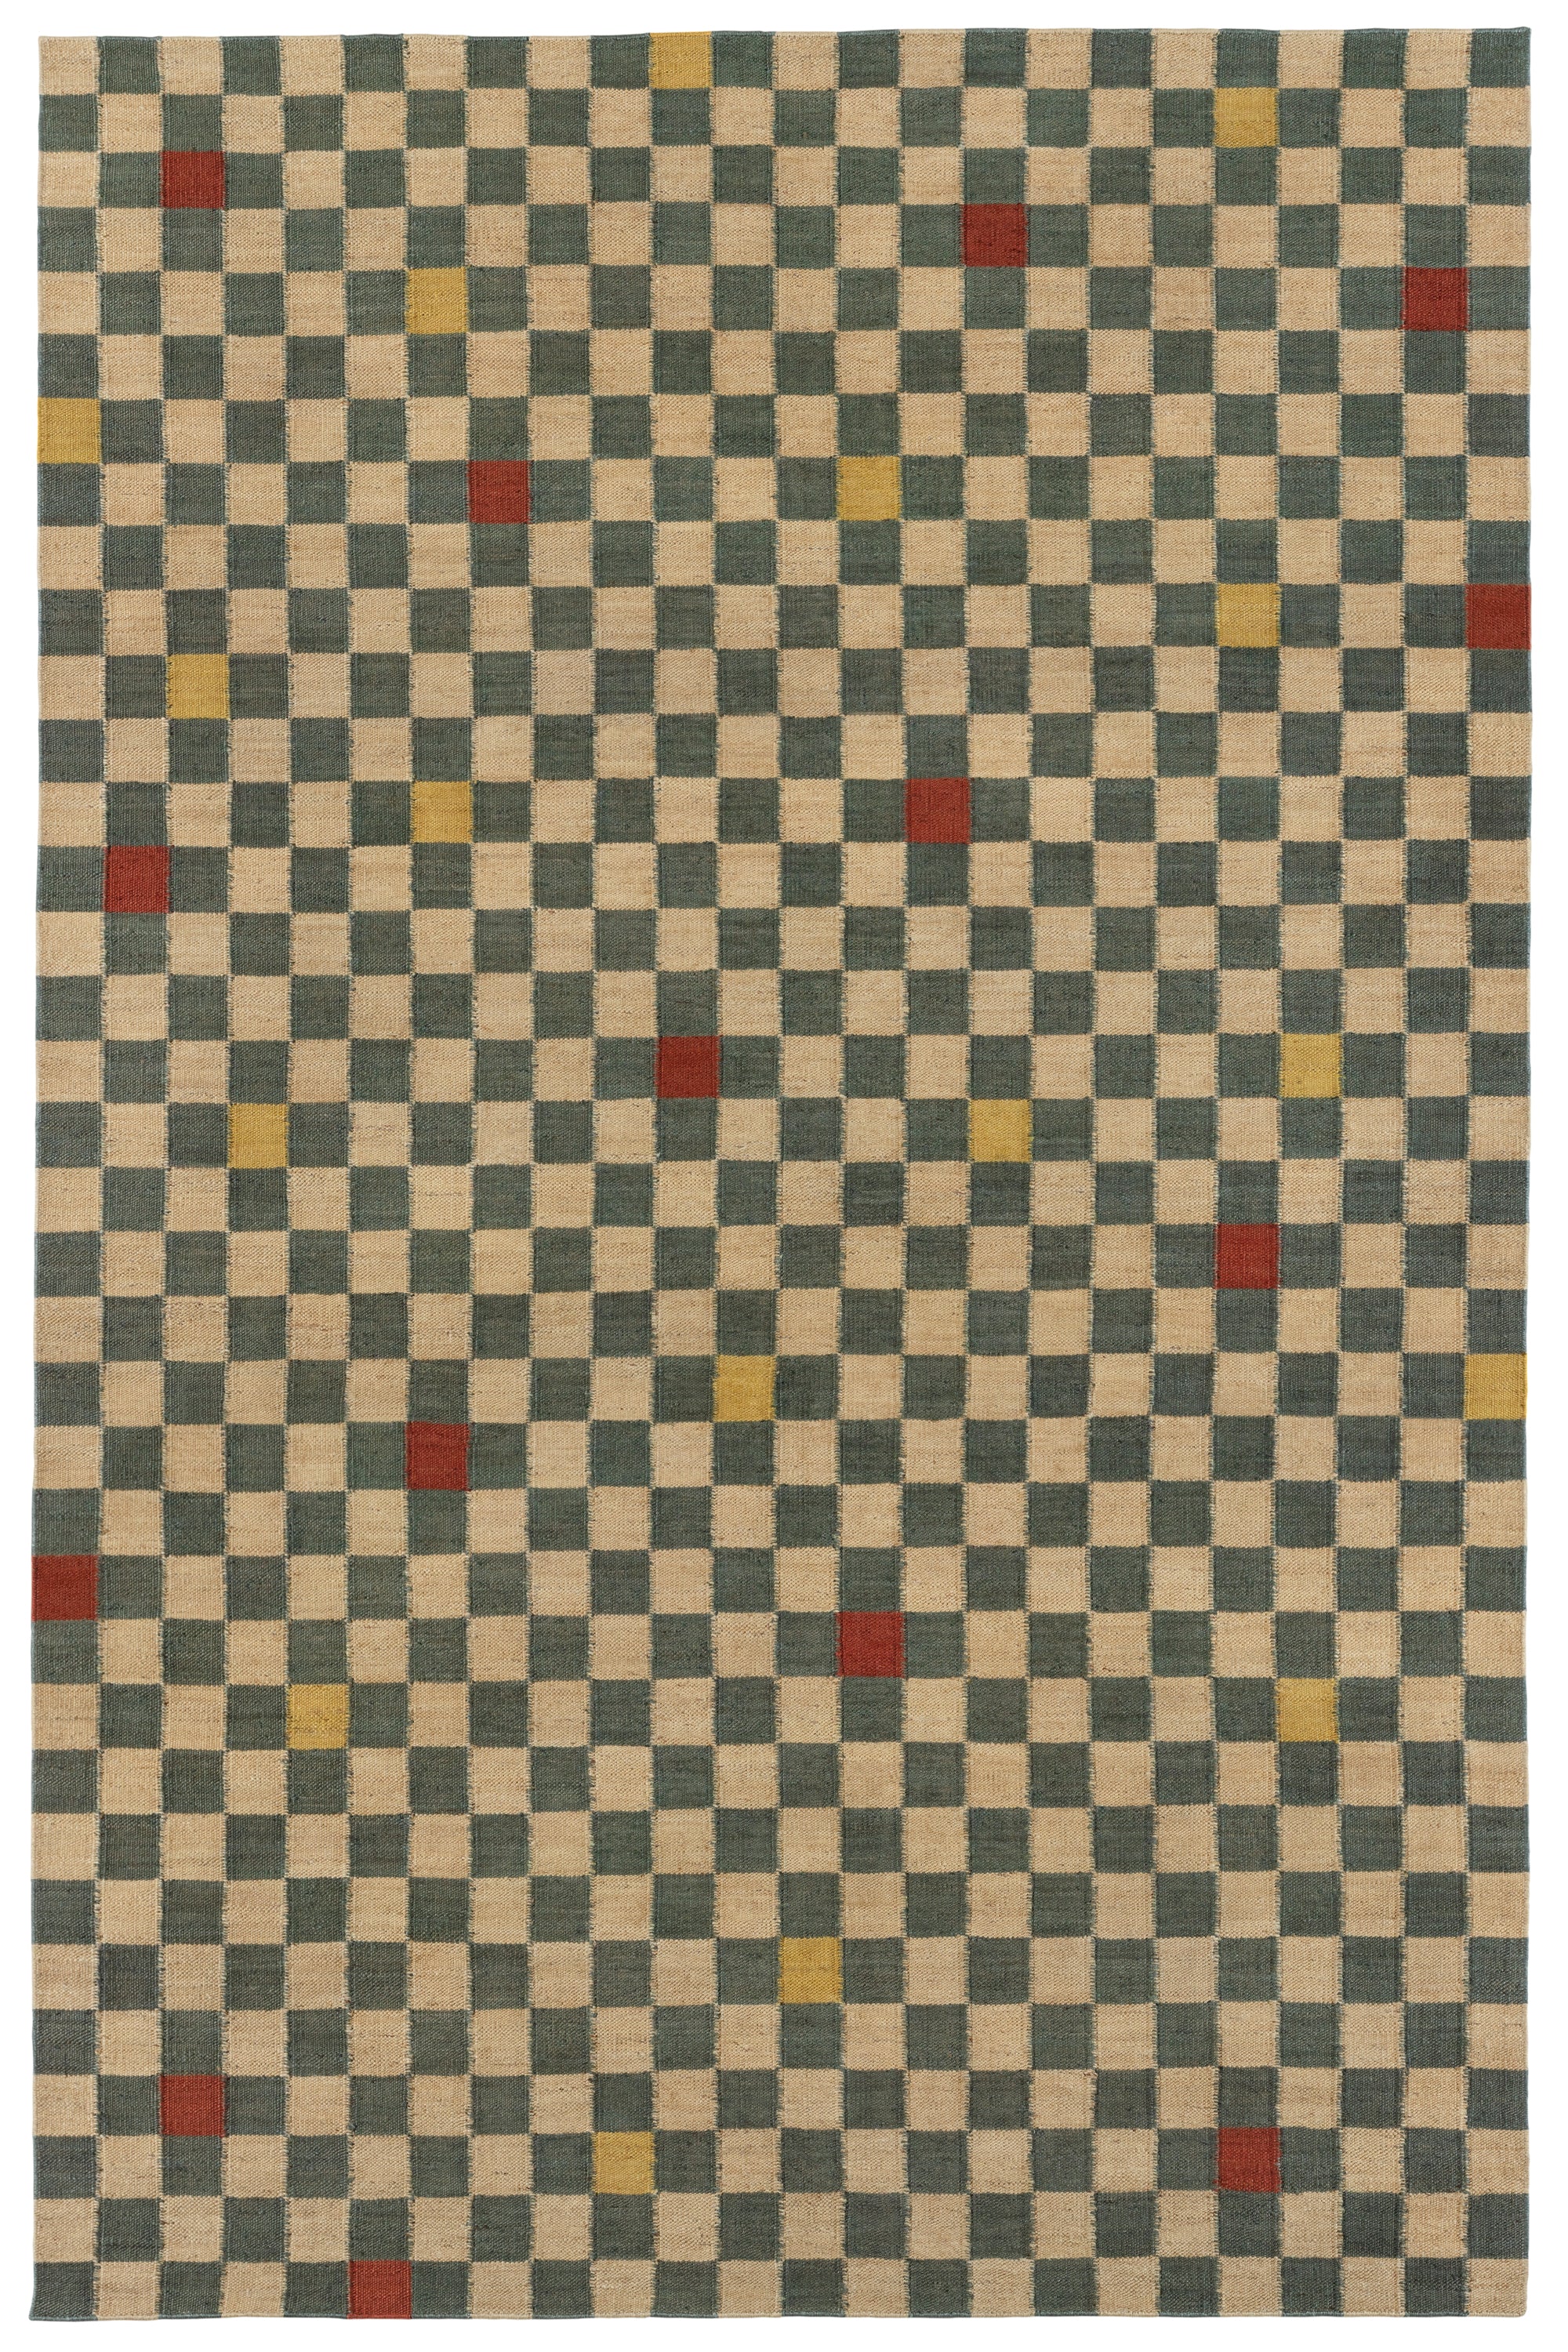 Full size Checkerboard Rug in bishop, a blue and white checkered pattern with random accents of red and yellow. 